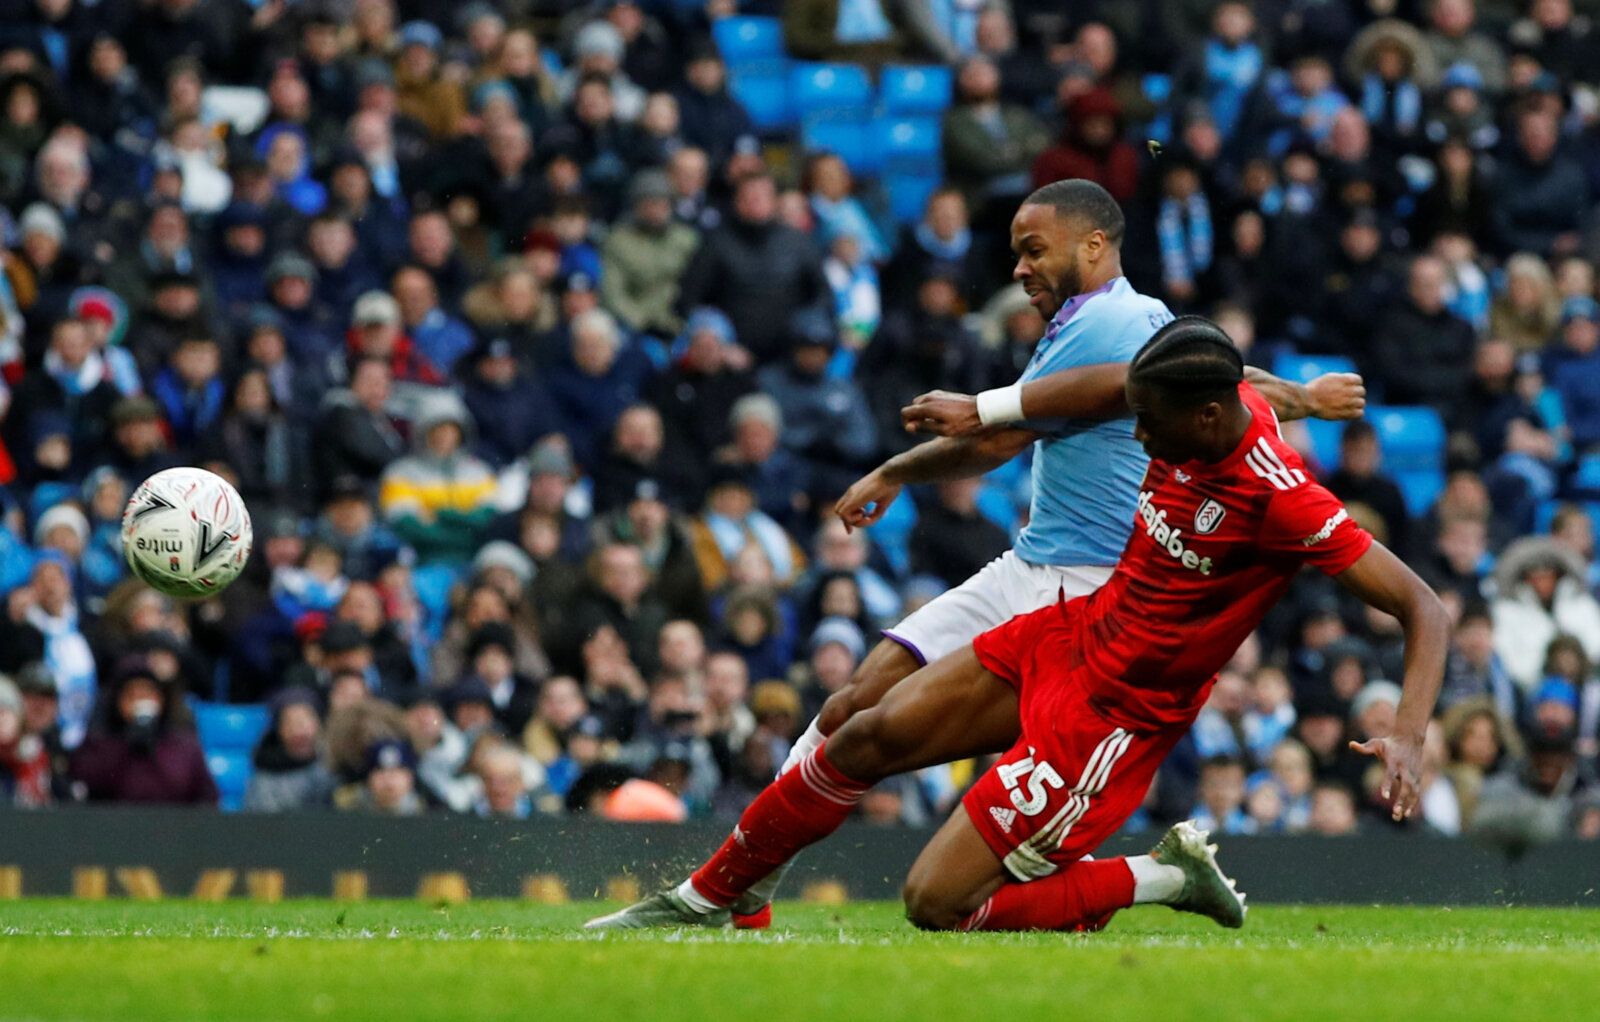 Soccer Football - FA Cup Fourth Round - Manchester City v Fulham - Etihad Stadium, Manchester, Britain - January 26, 2020  Manchester City's Raheem Sterling in action with Fulham's Terence Kongolo  REUTERS/Phil Noble